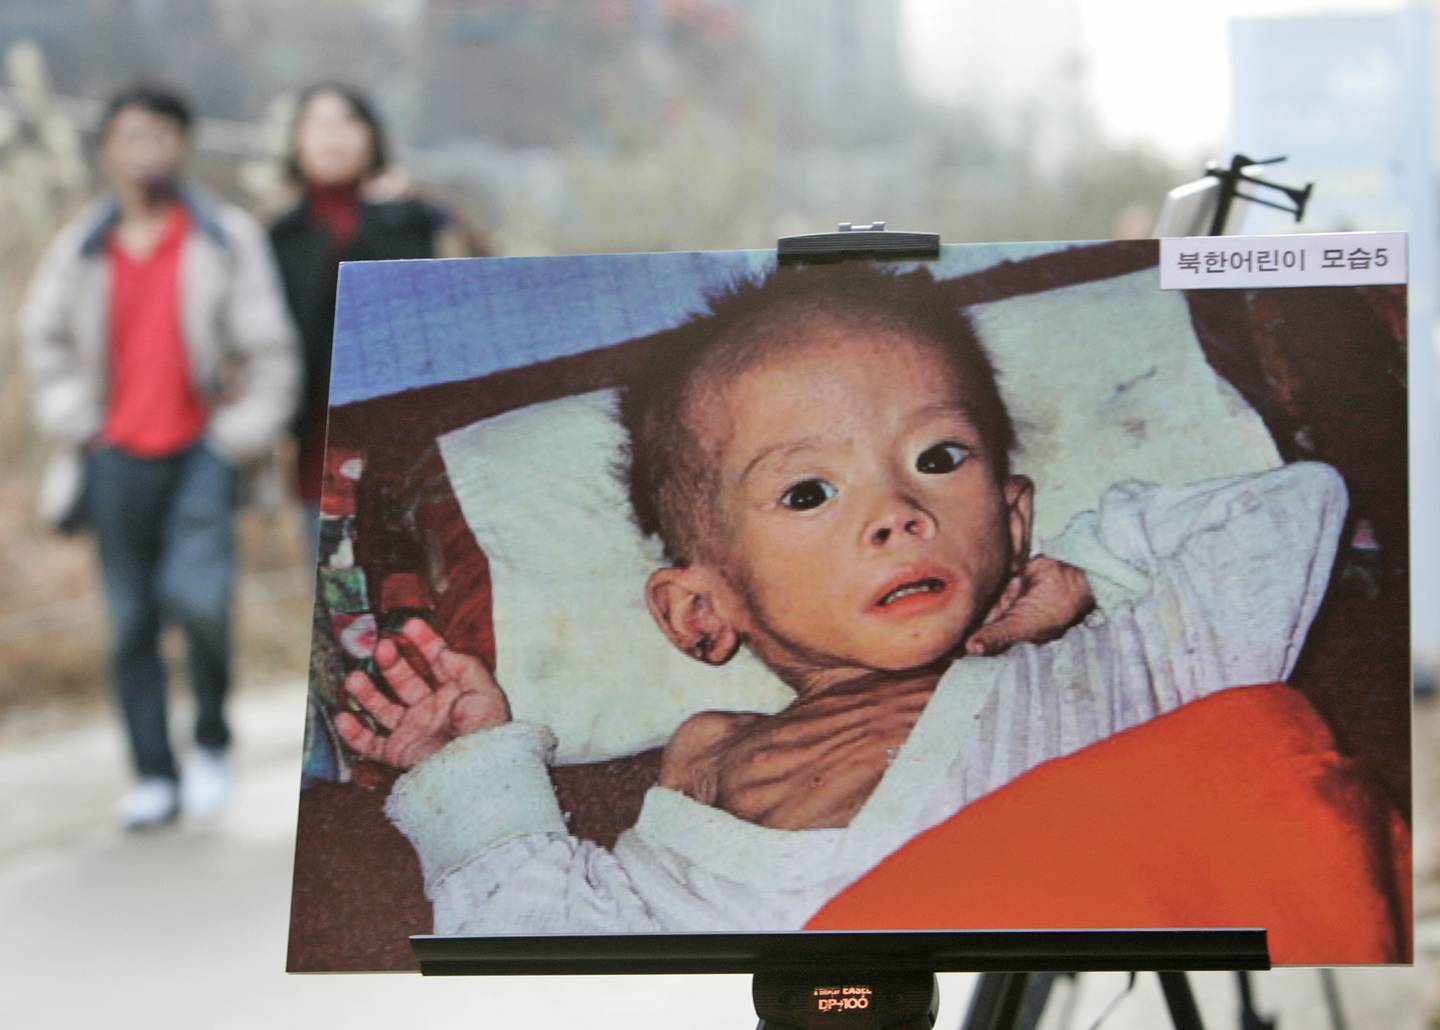 A South Korean couple passes by a photo showing a North Korean child suffering from famine during a photo exhibition held by a human rights group against North Korea,  to commemorate the 60th anniversary of the universal declaration of human rights on the street in Seoul, South Korea, Monday, Dec. 8, 2008. A United Nations committee last month approved a resolution calling for improvement in human rights in North Korea.(AP Photo/Ahn Young-joon)